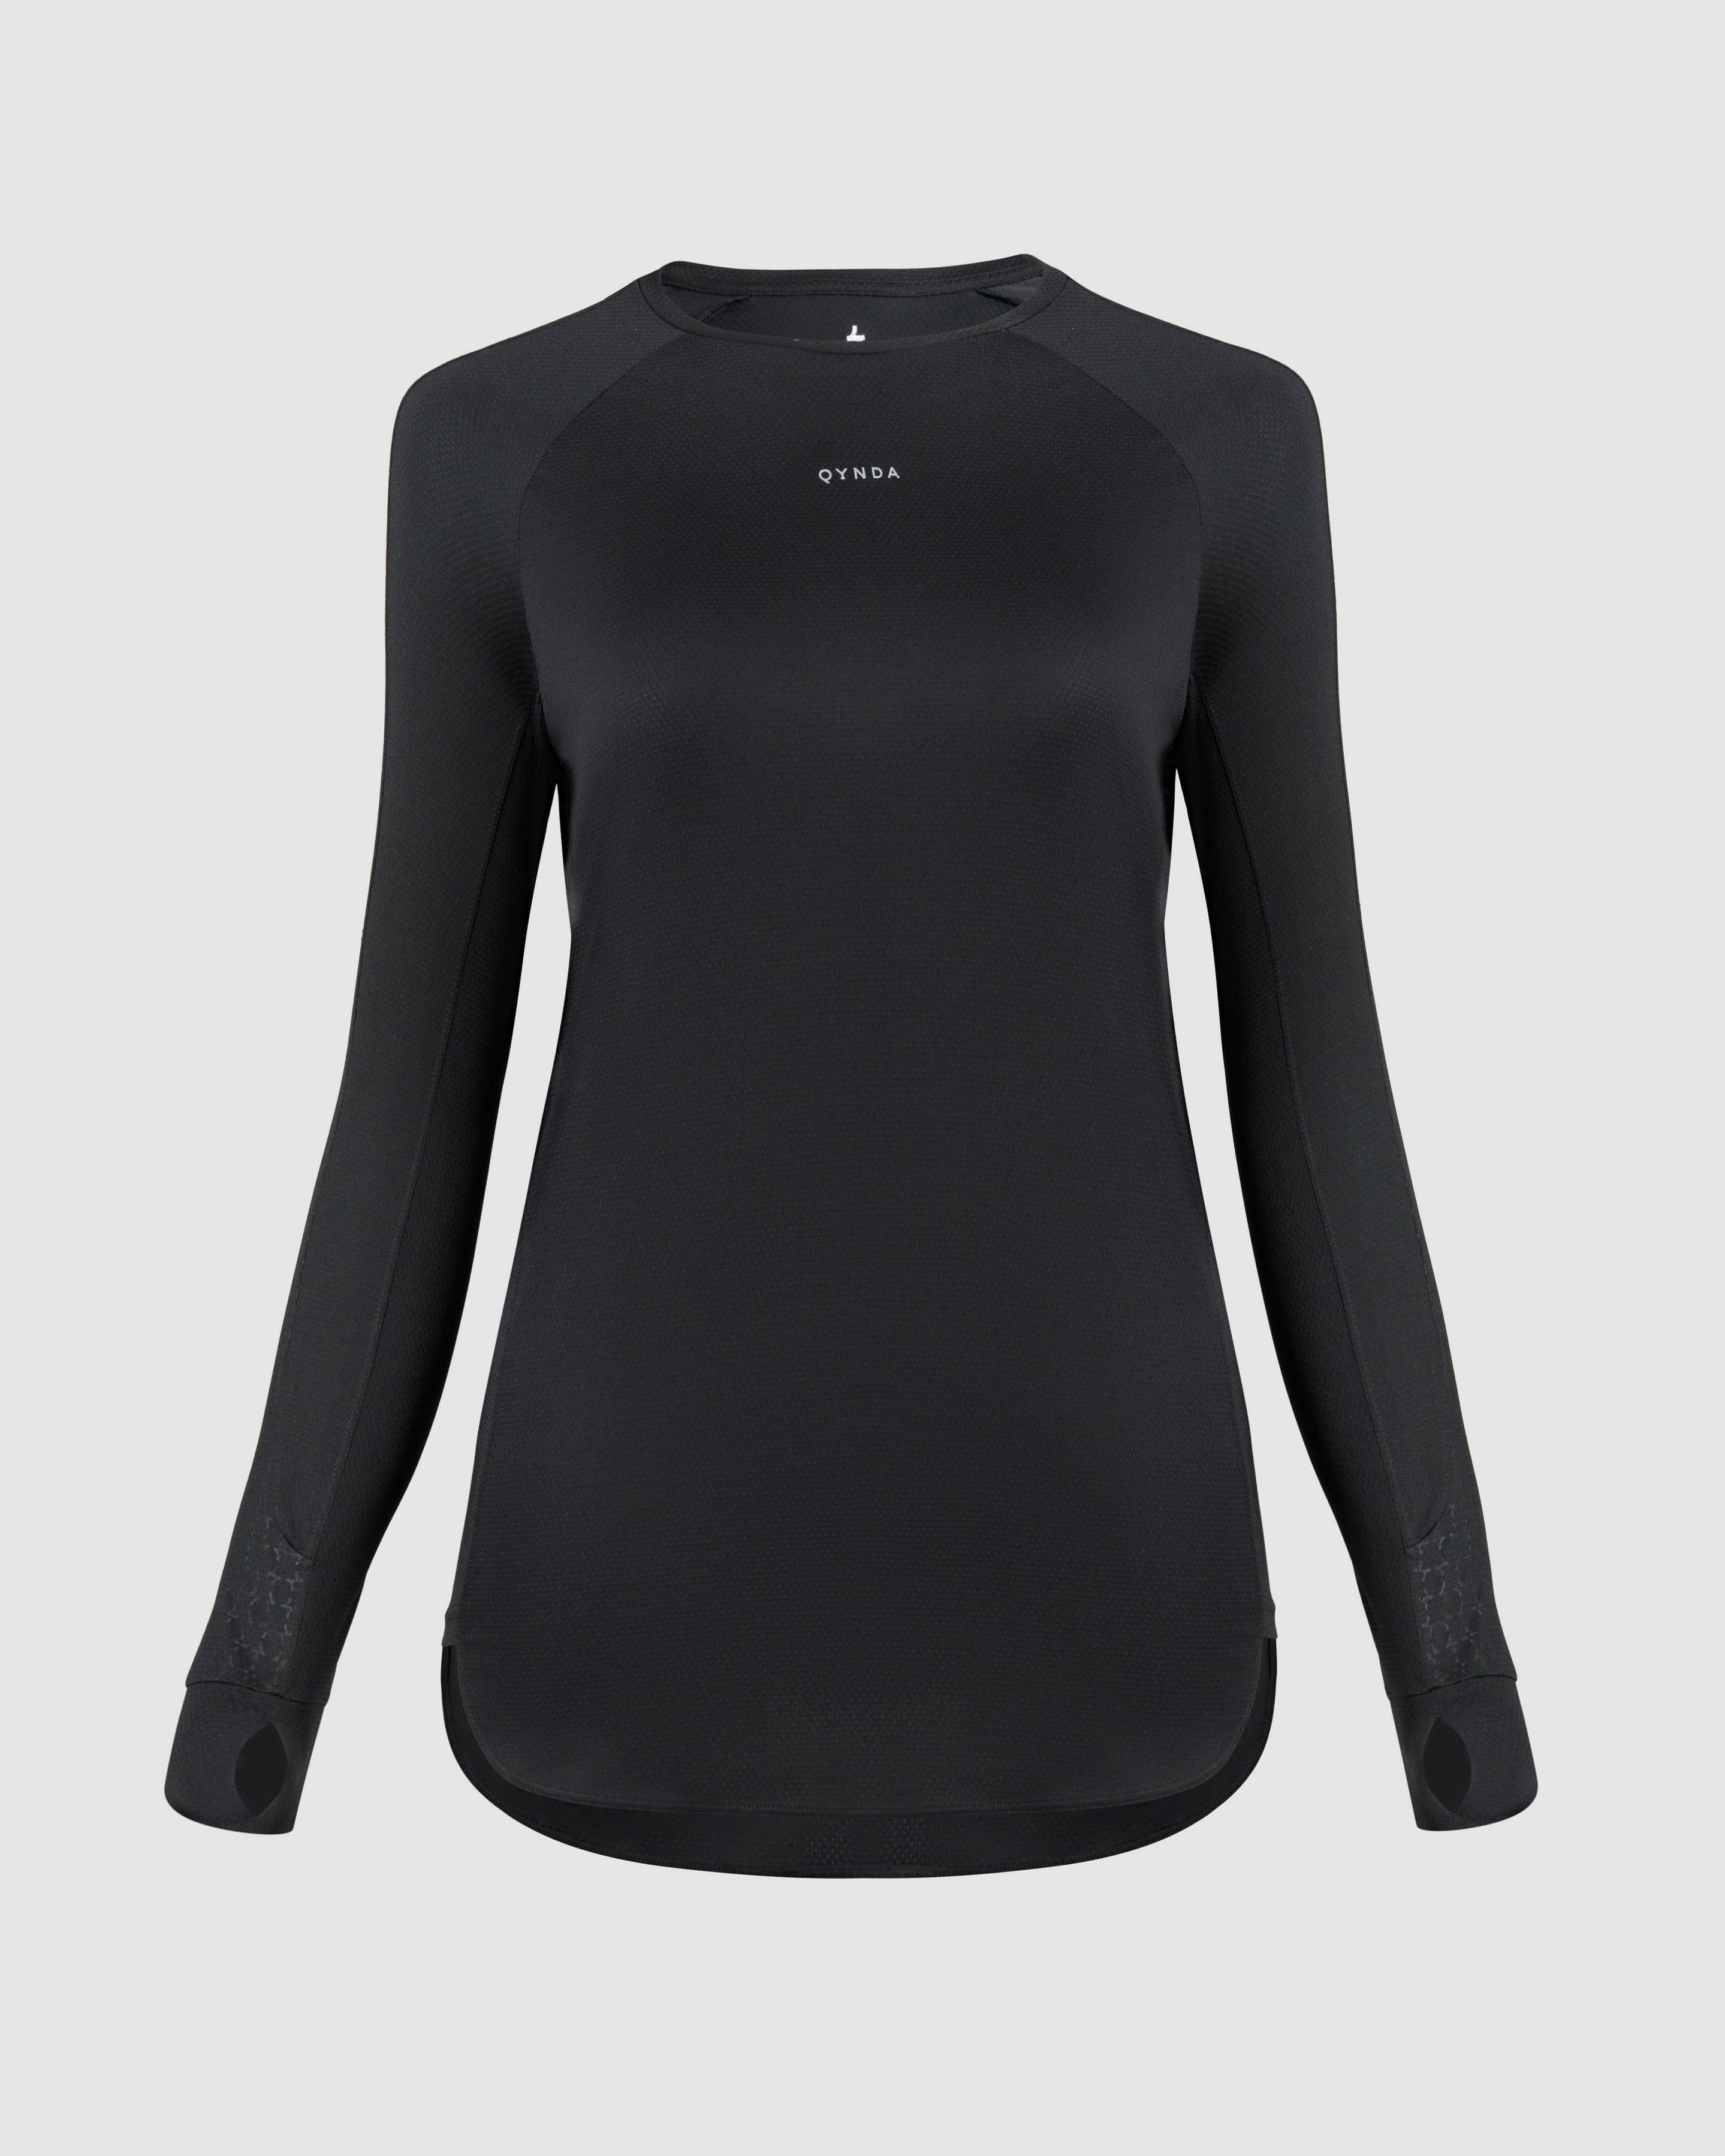 QYNDA black ACT LONG SLEEVE T-SHIRT with a crew neck Made of no see-through fabric displayed on an invisible mannequin against a neutral background.